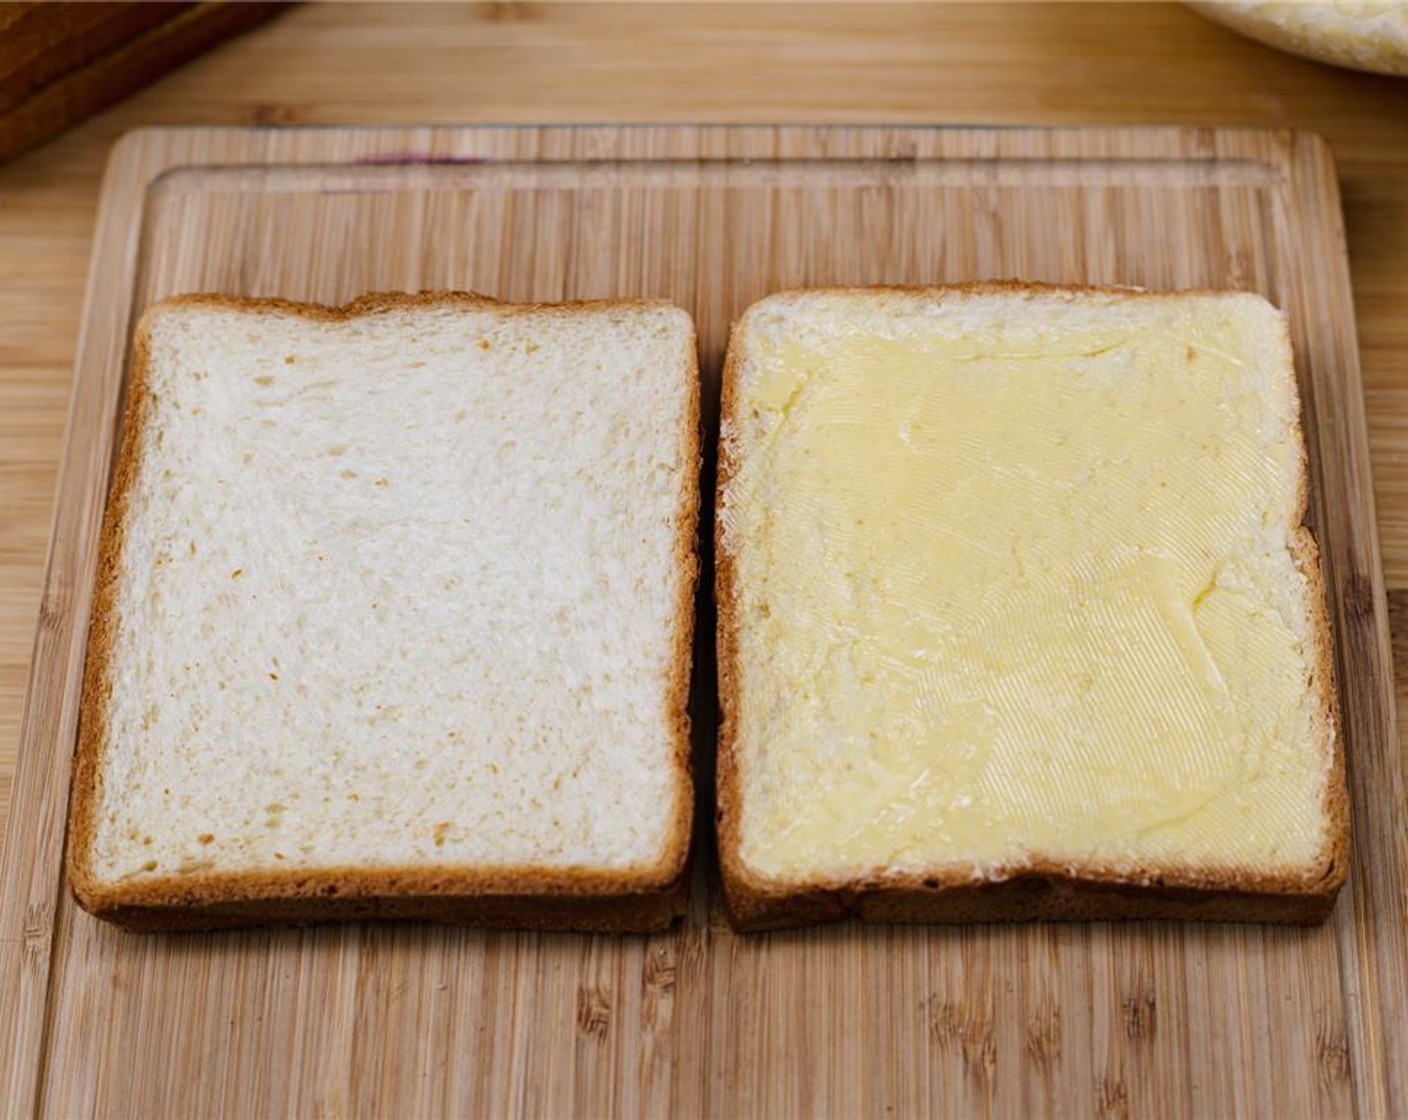 step 4 Generously spread one side of the bread with Salted Butter (1/4 cup) and flip over.